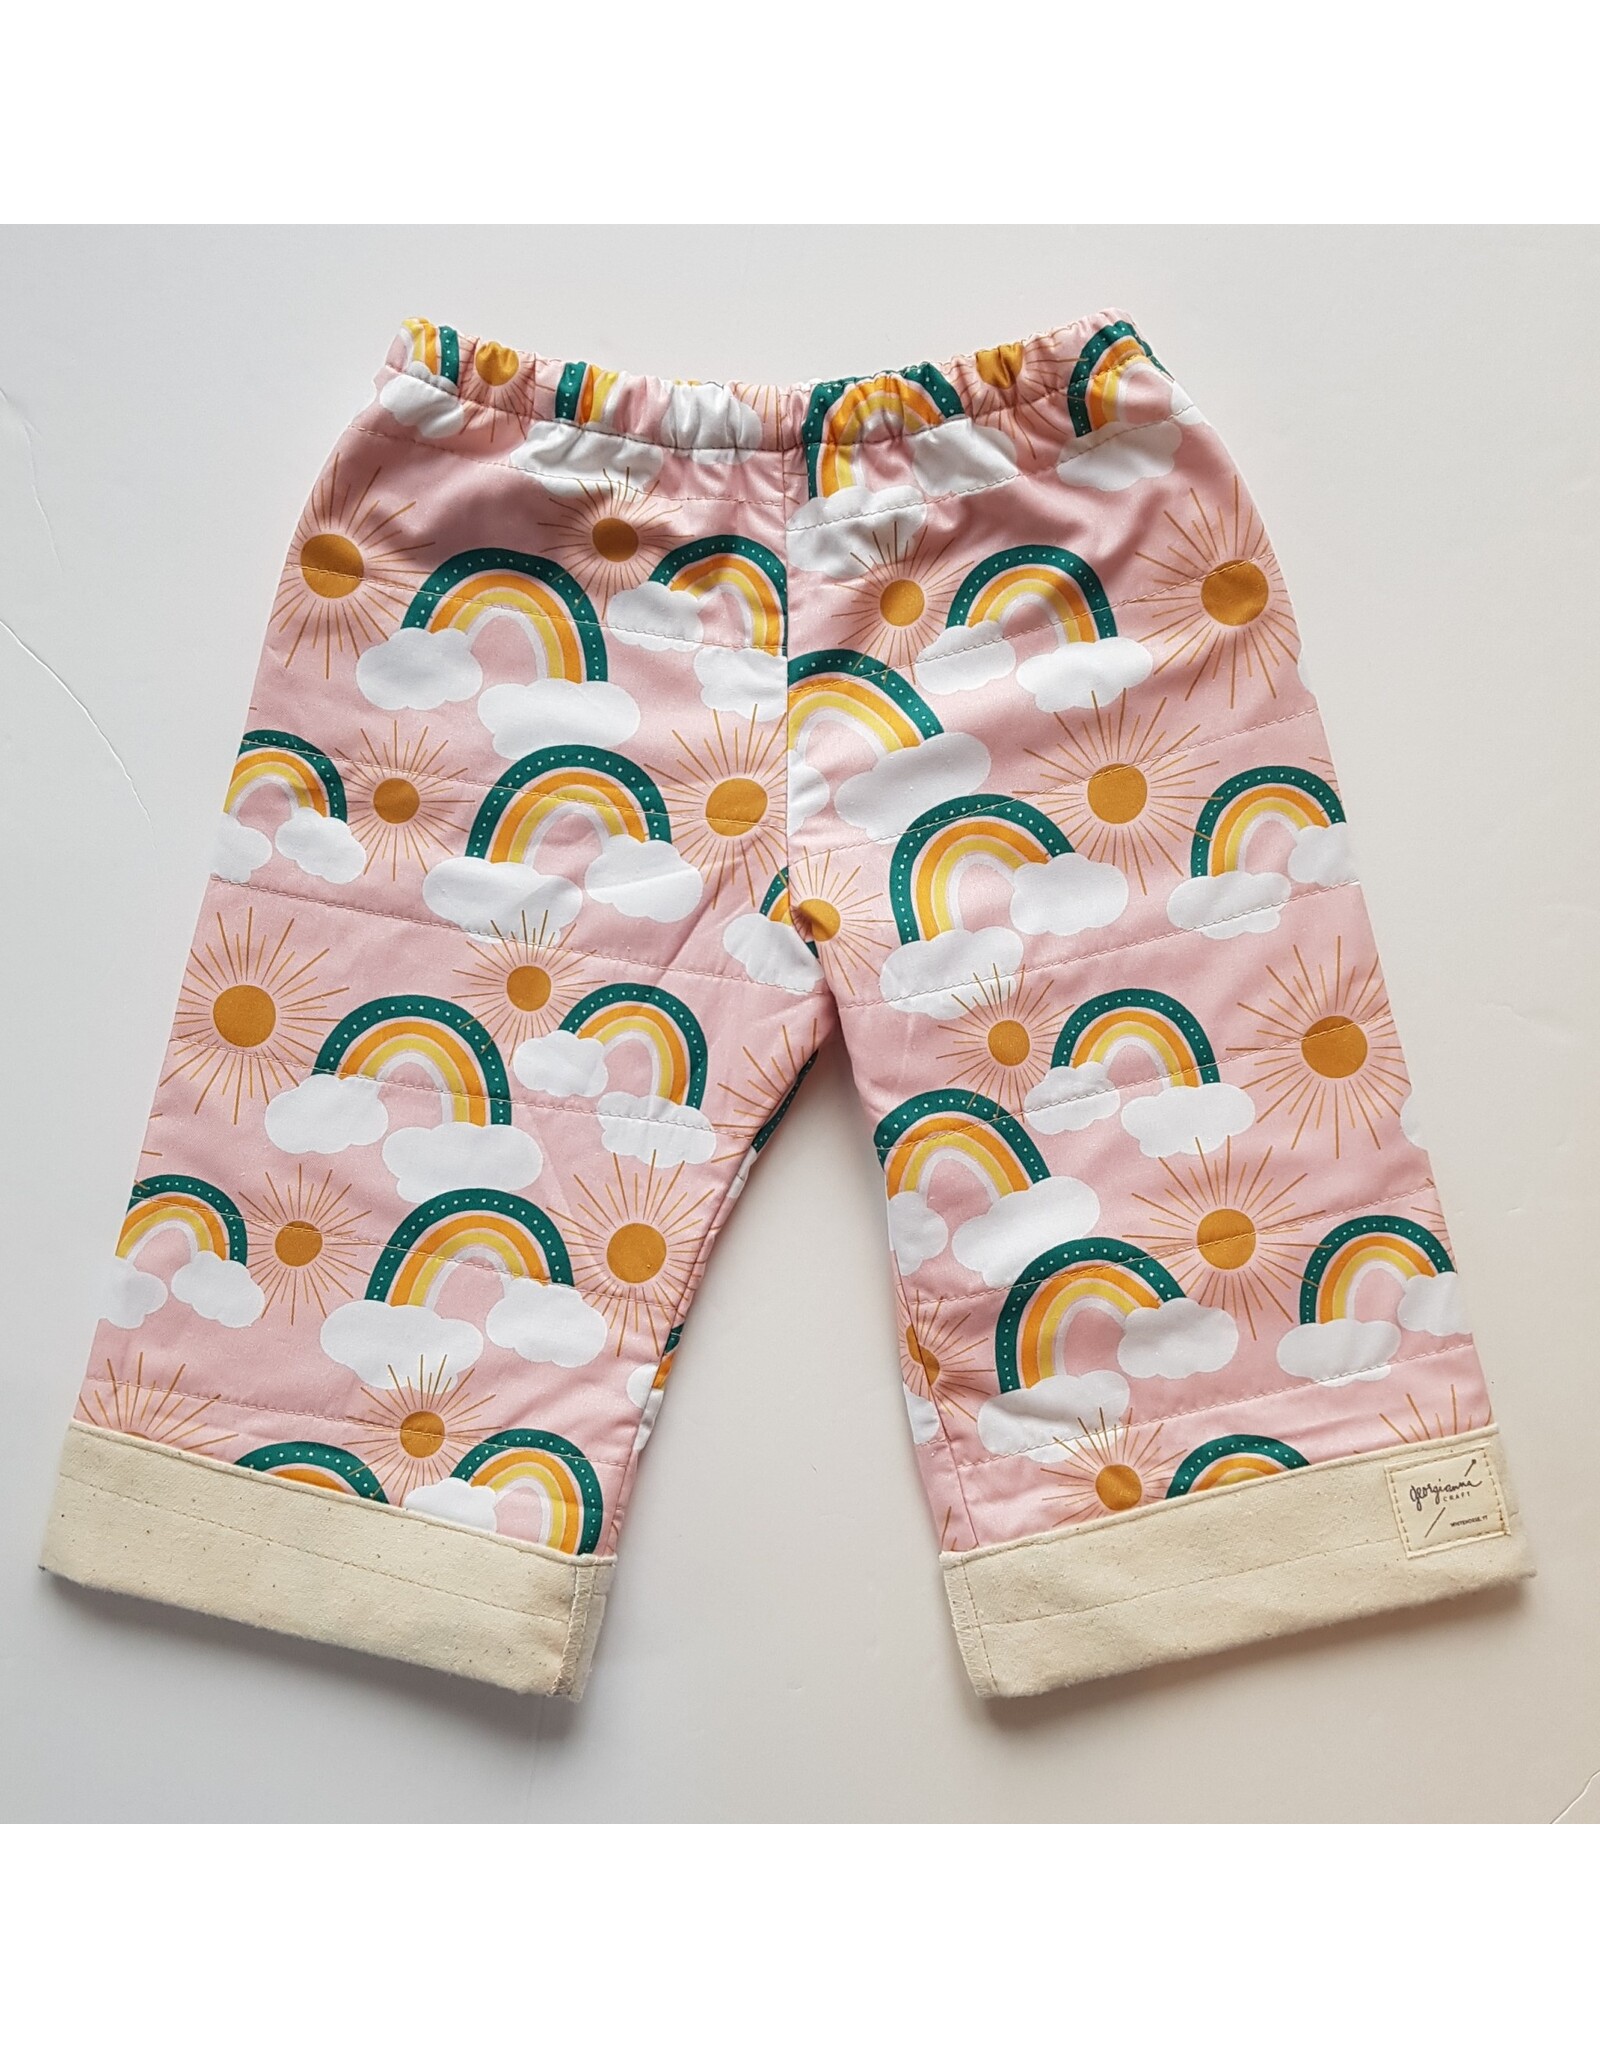 Georgi Pearson Quilty Pants, Pink with Rainbows